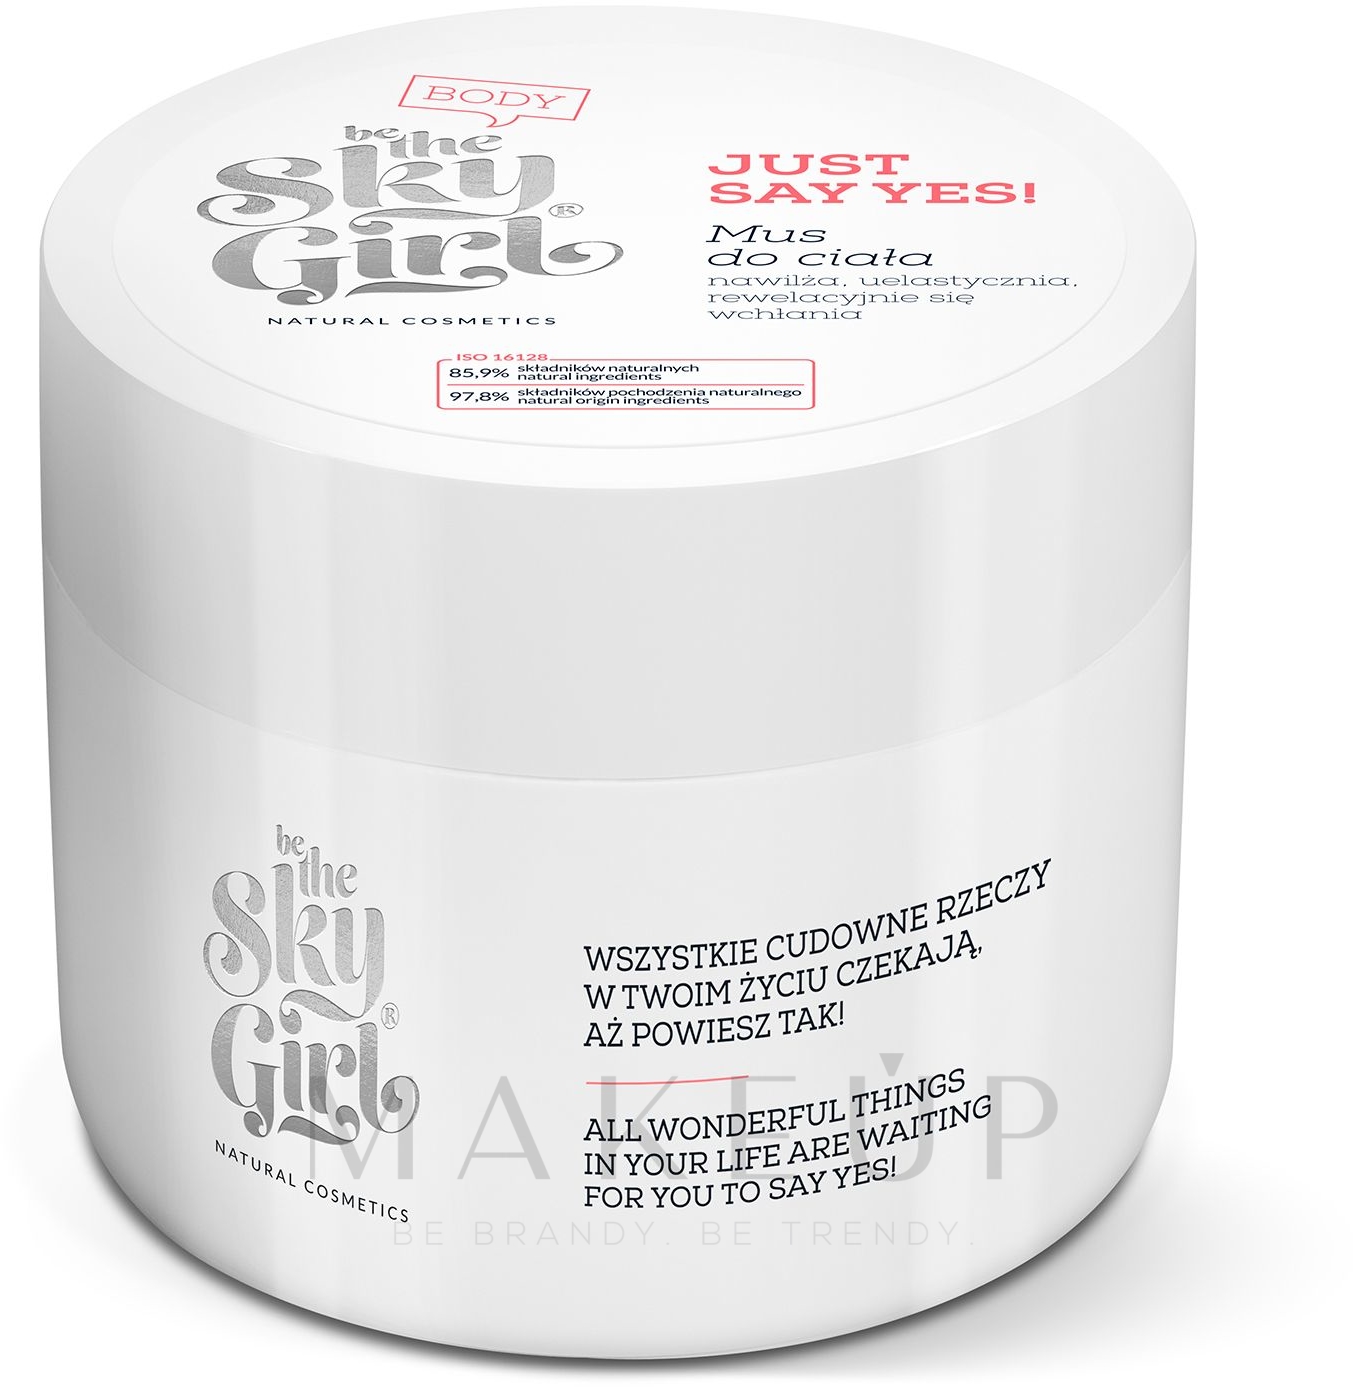 Körpermousse - Be the Sky Girl "Just Say Yes!" Body Mousse — Bild 200 ml